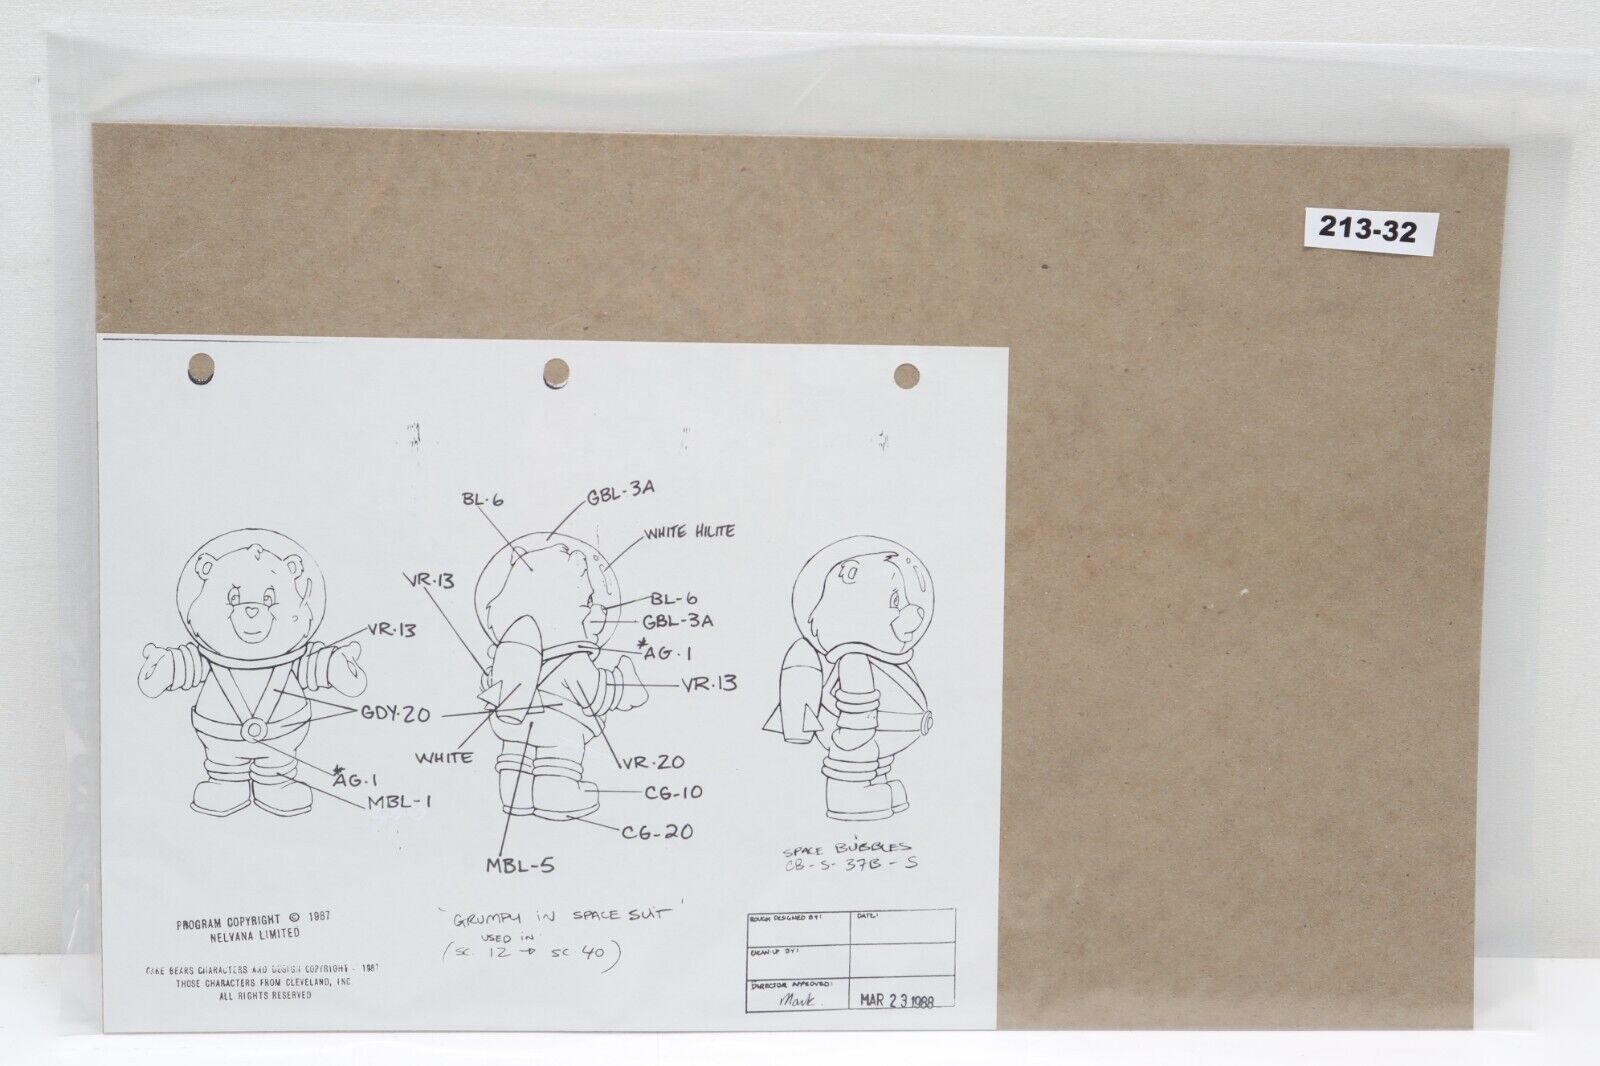 Care Bears: Grumpy in Space Suit COPY Production Animation Drawing (213-32)